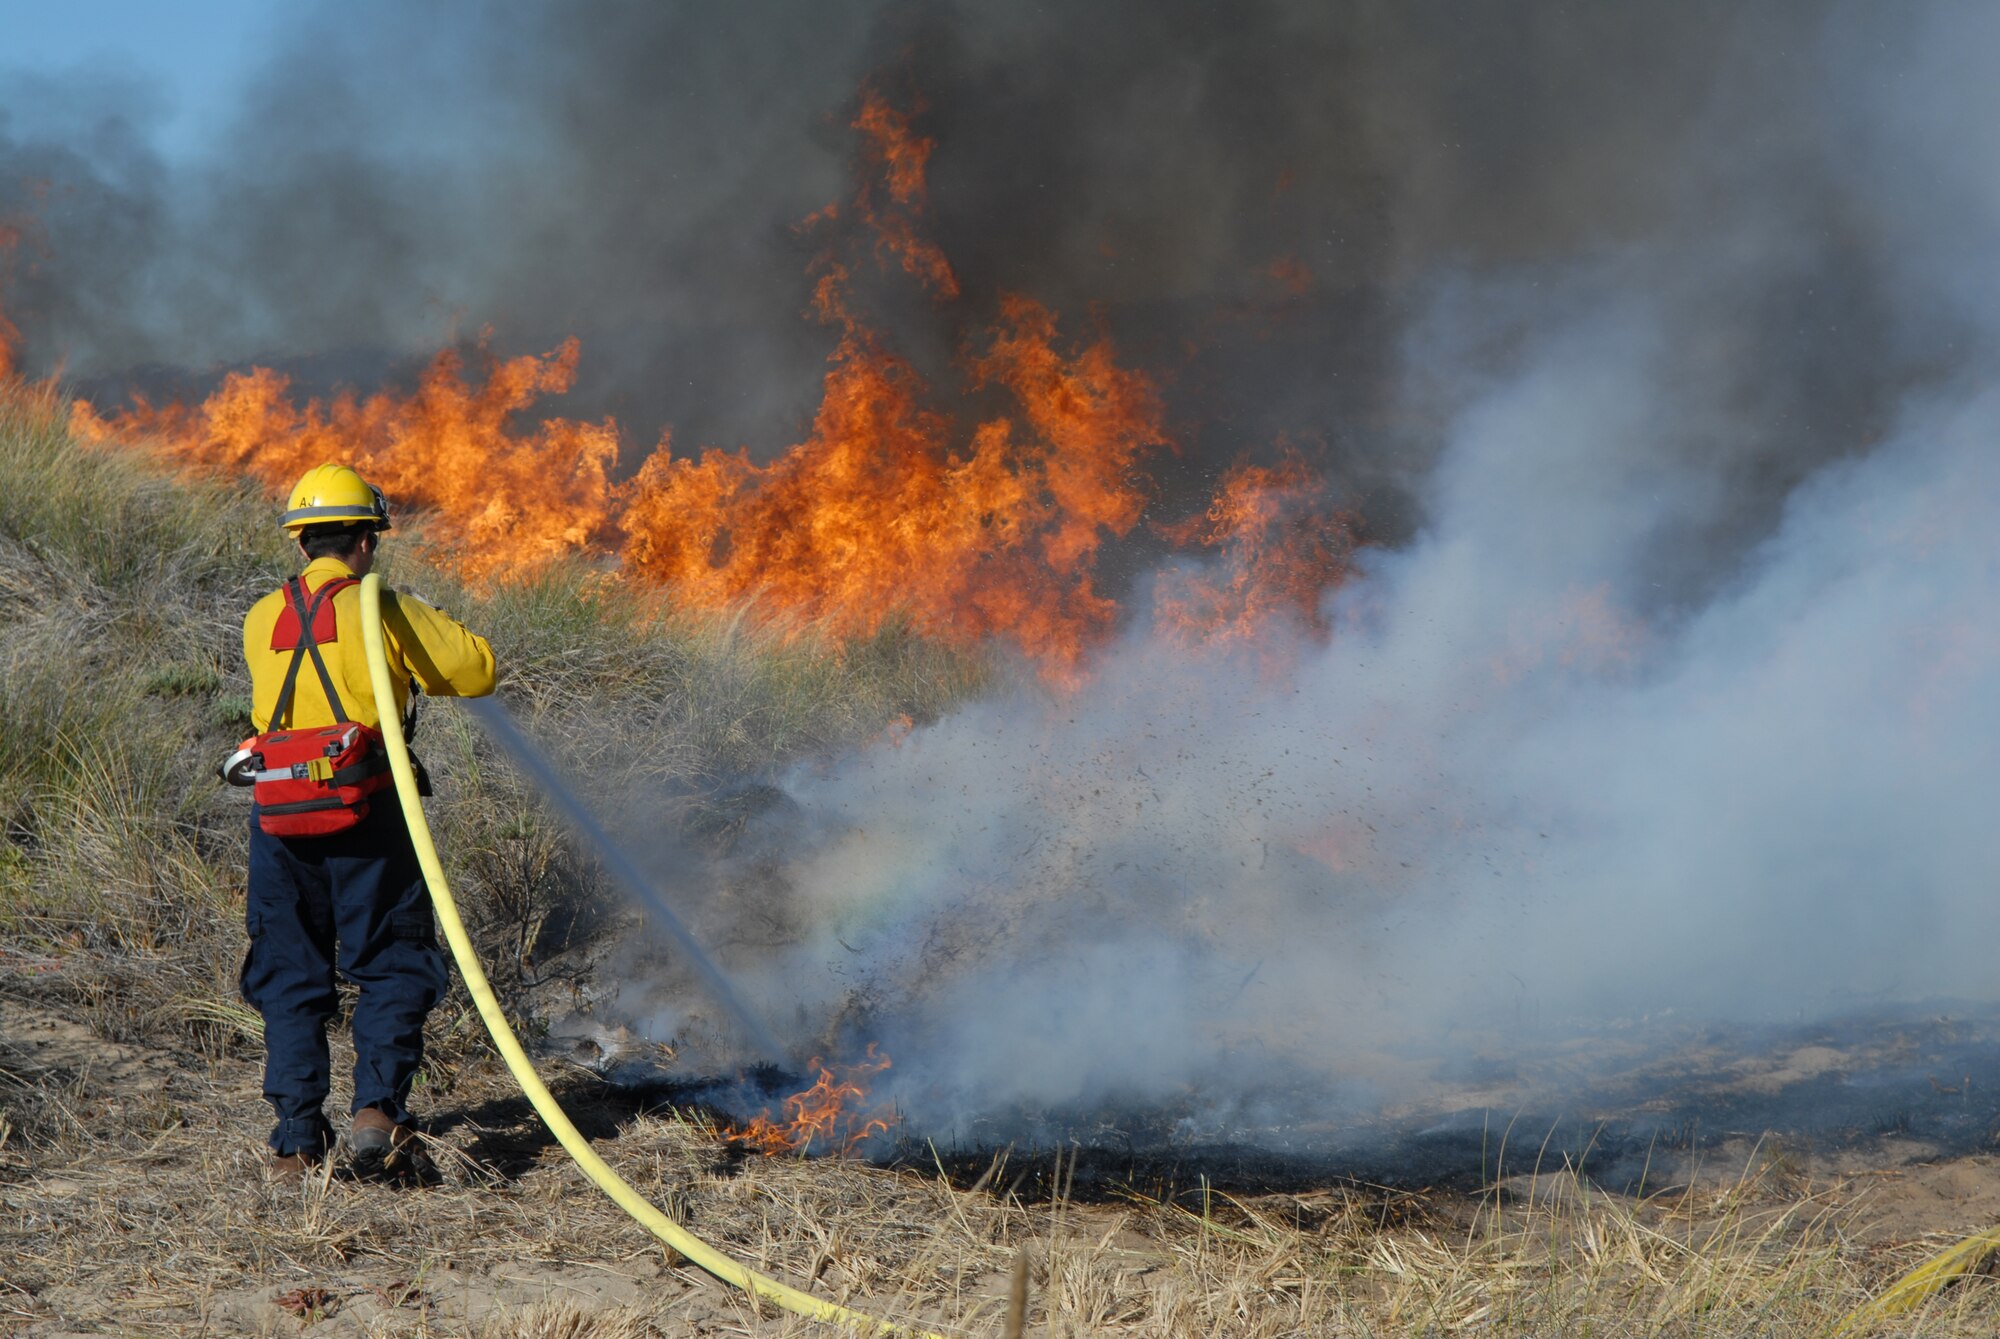 VANDENBERG AIR FORCE BASE, Calif.  -- A Firefighter from the 30th Civil Engineer Squadron extinguishes some of the fire during a controlled burn to help enlarge the habitat for an endangered species of Western Snowy Plovers here Nov. 6.  (U.S. Air Force photo/Airman 1st Class Antoinette Lyons)
